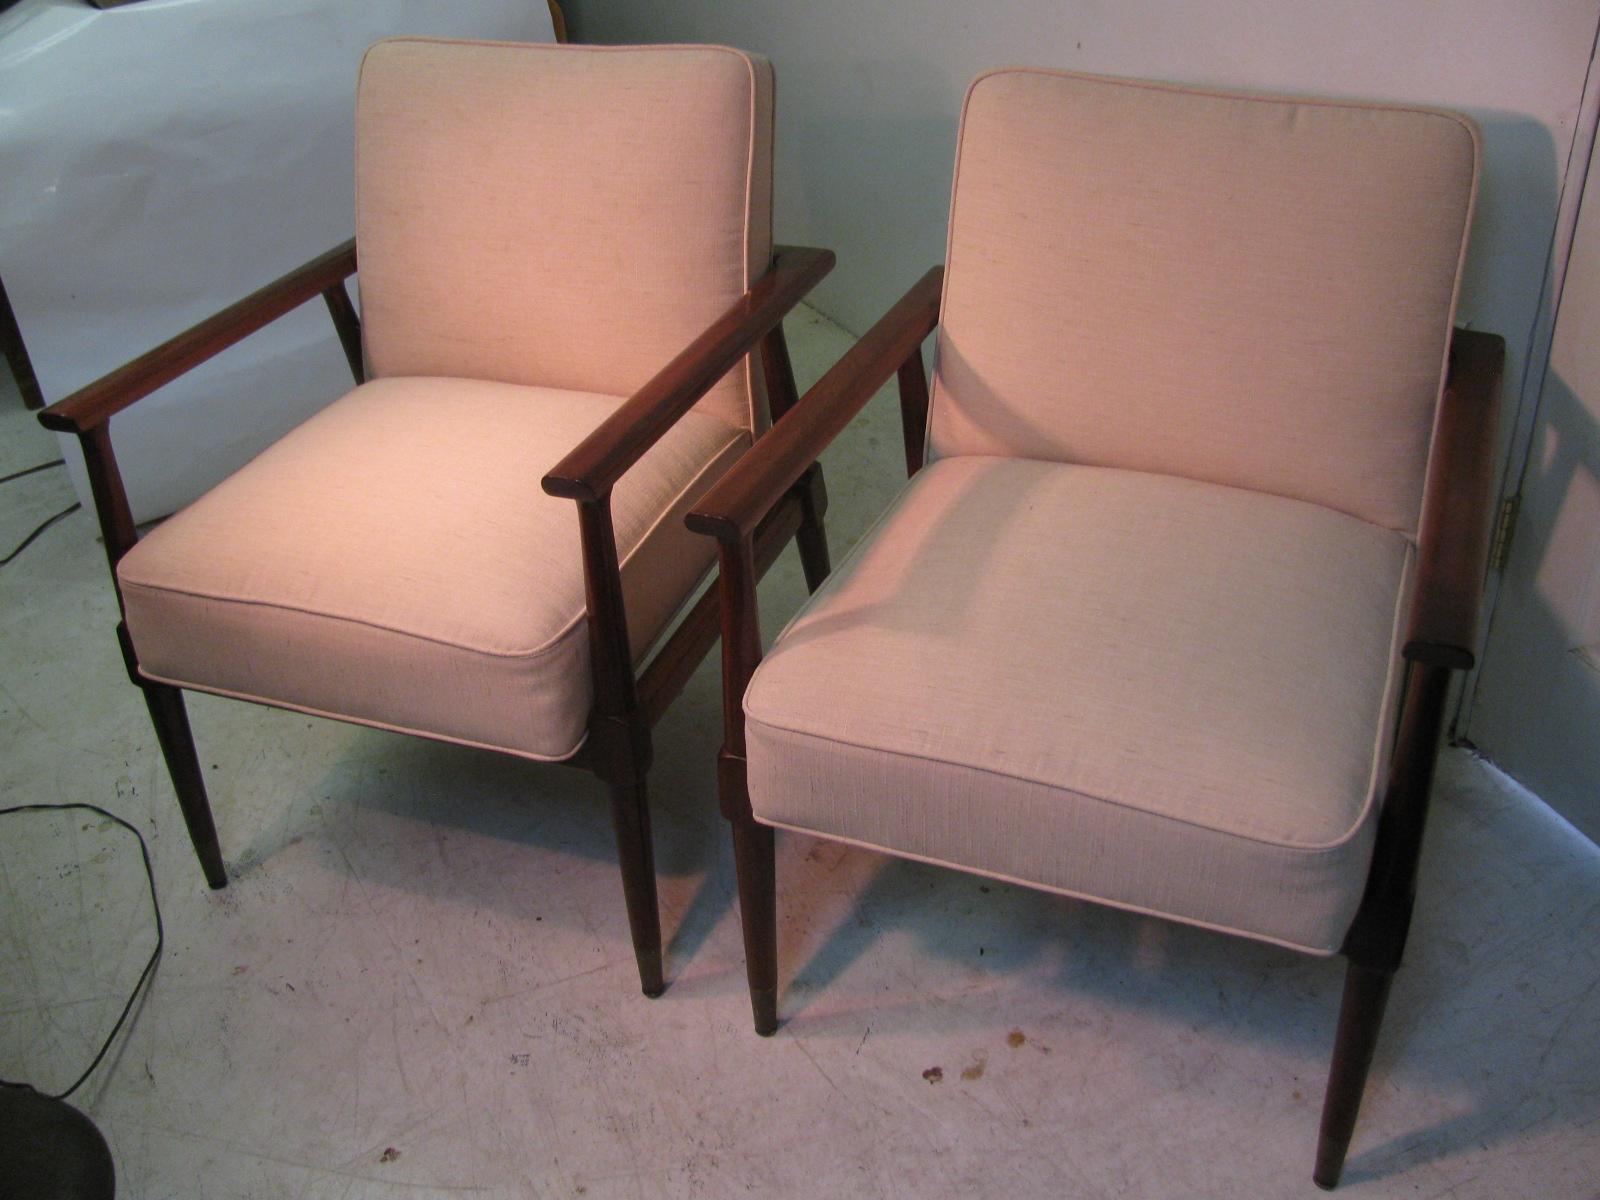 Pair of Mid-Century Modern Black Walnut Lounge Armchairs, 1957 For Sale 6